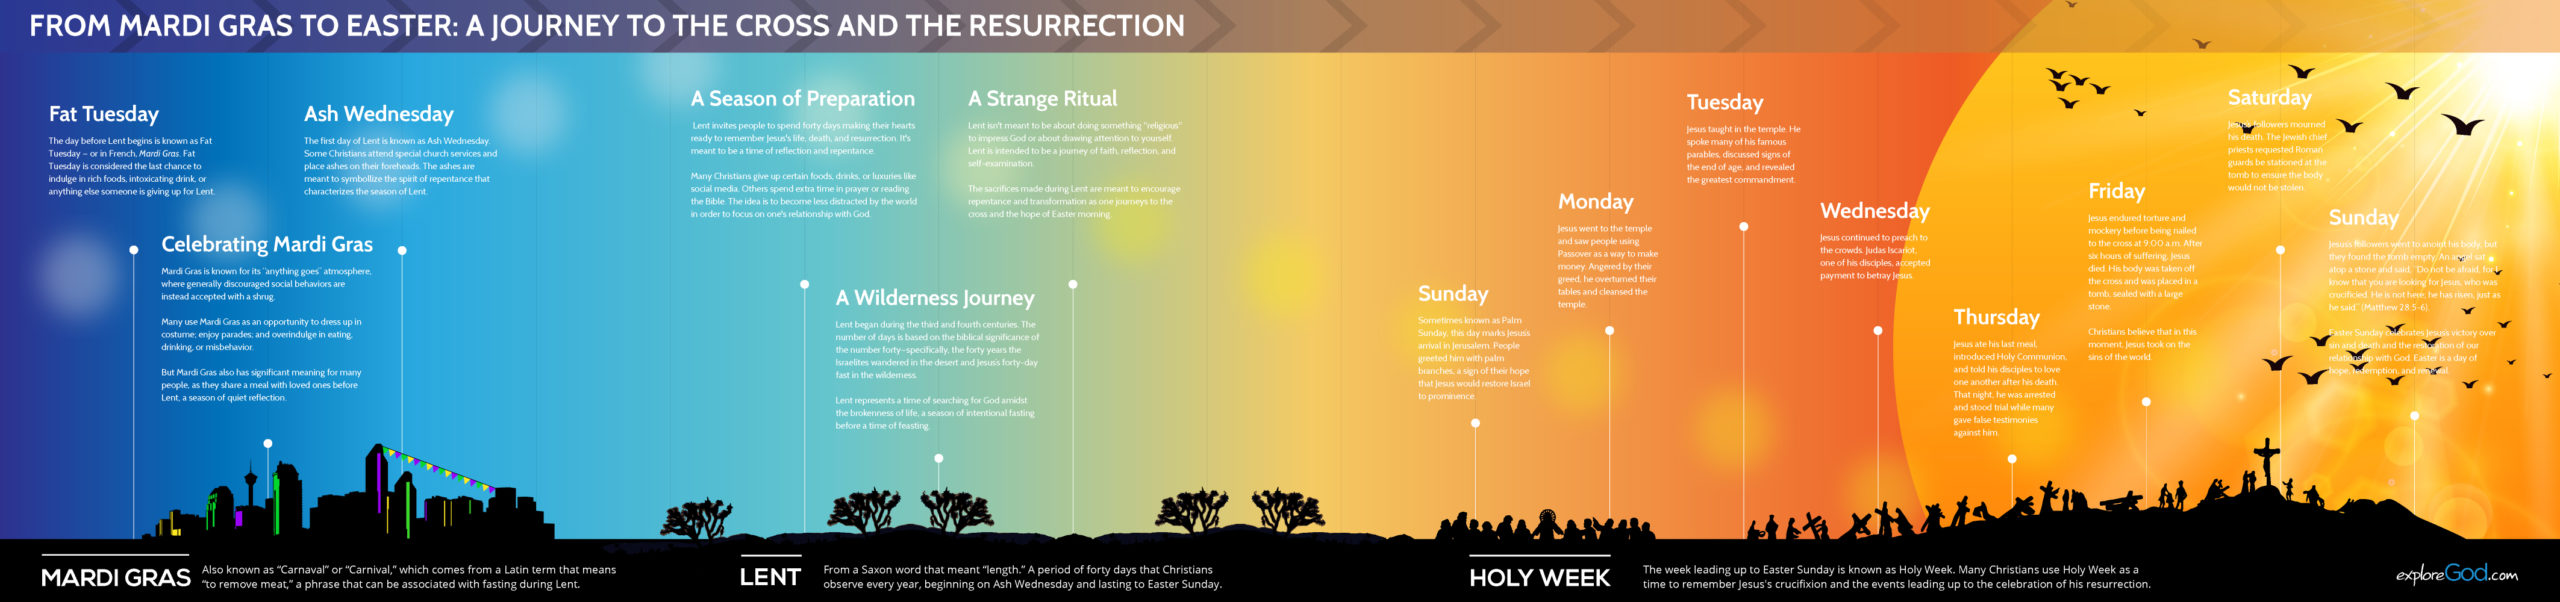 Easter Infographic